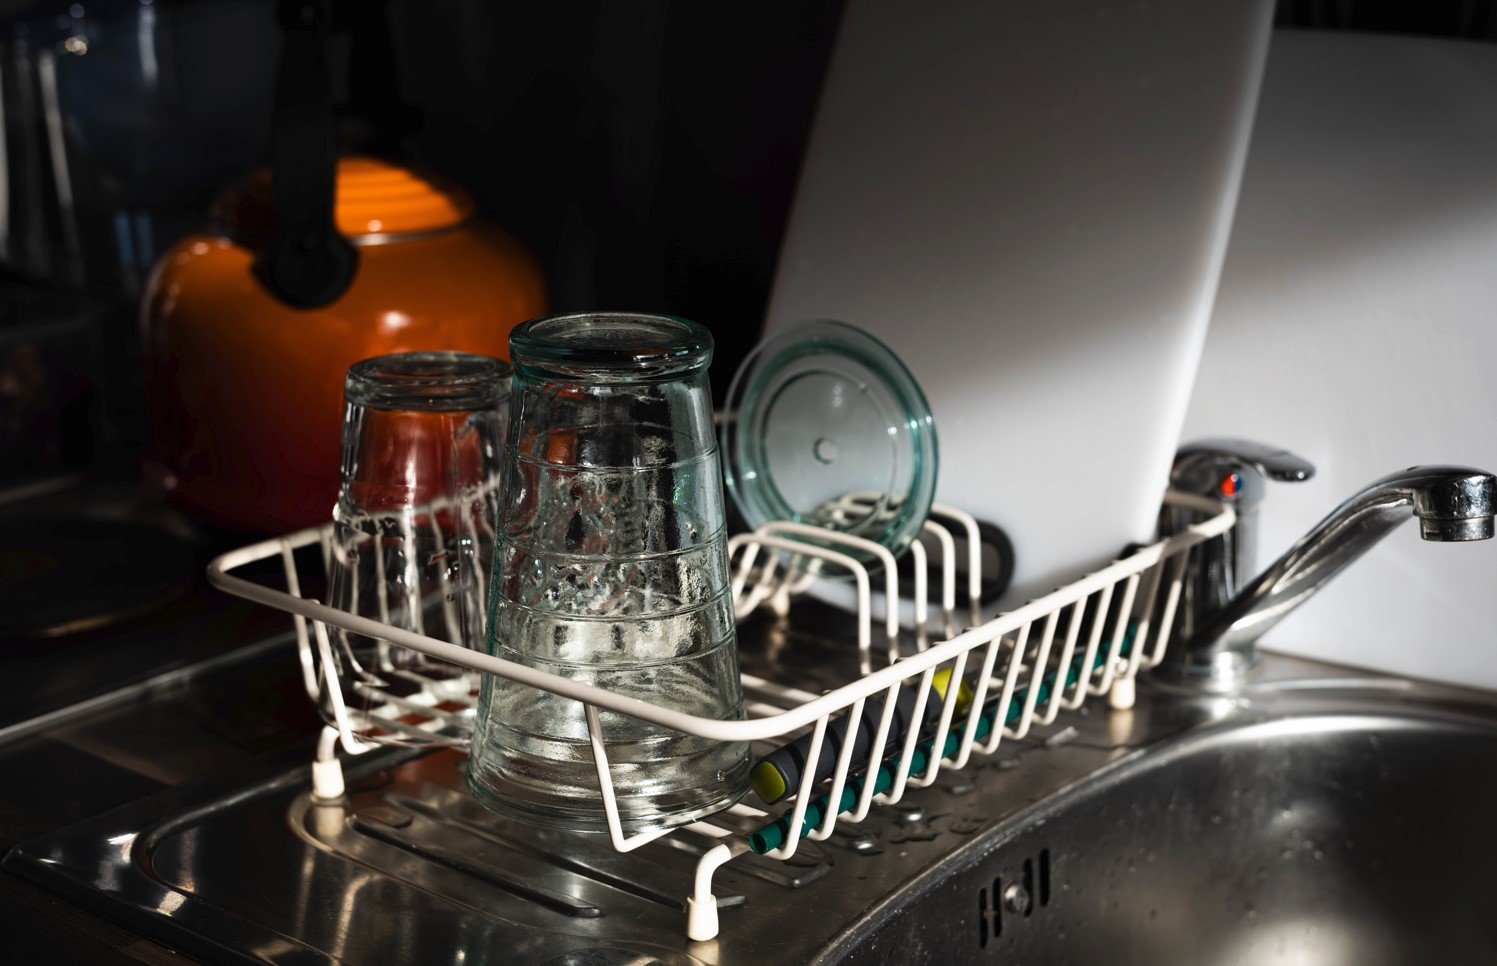 What should not go in a dishwasher